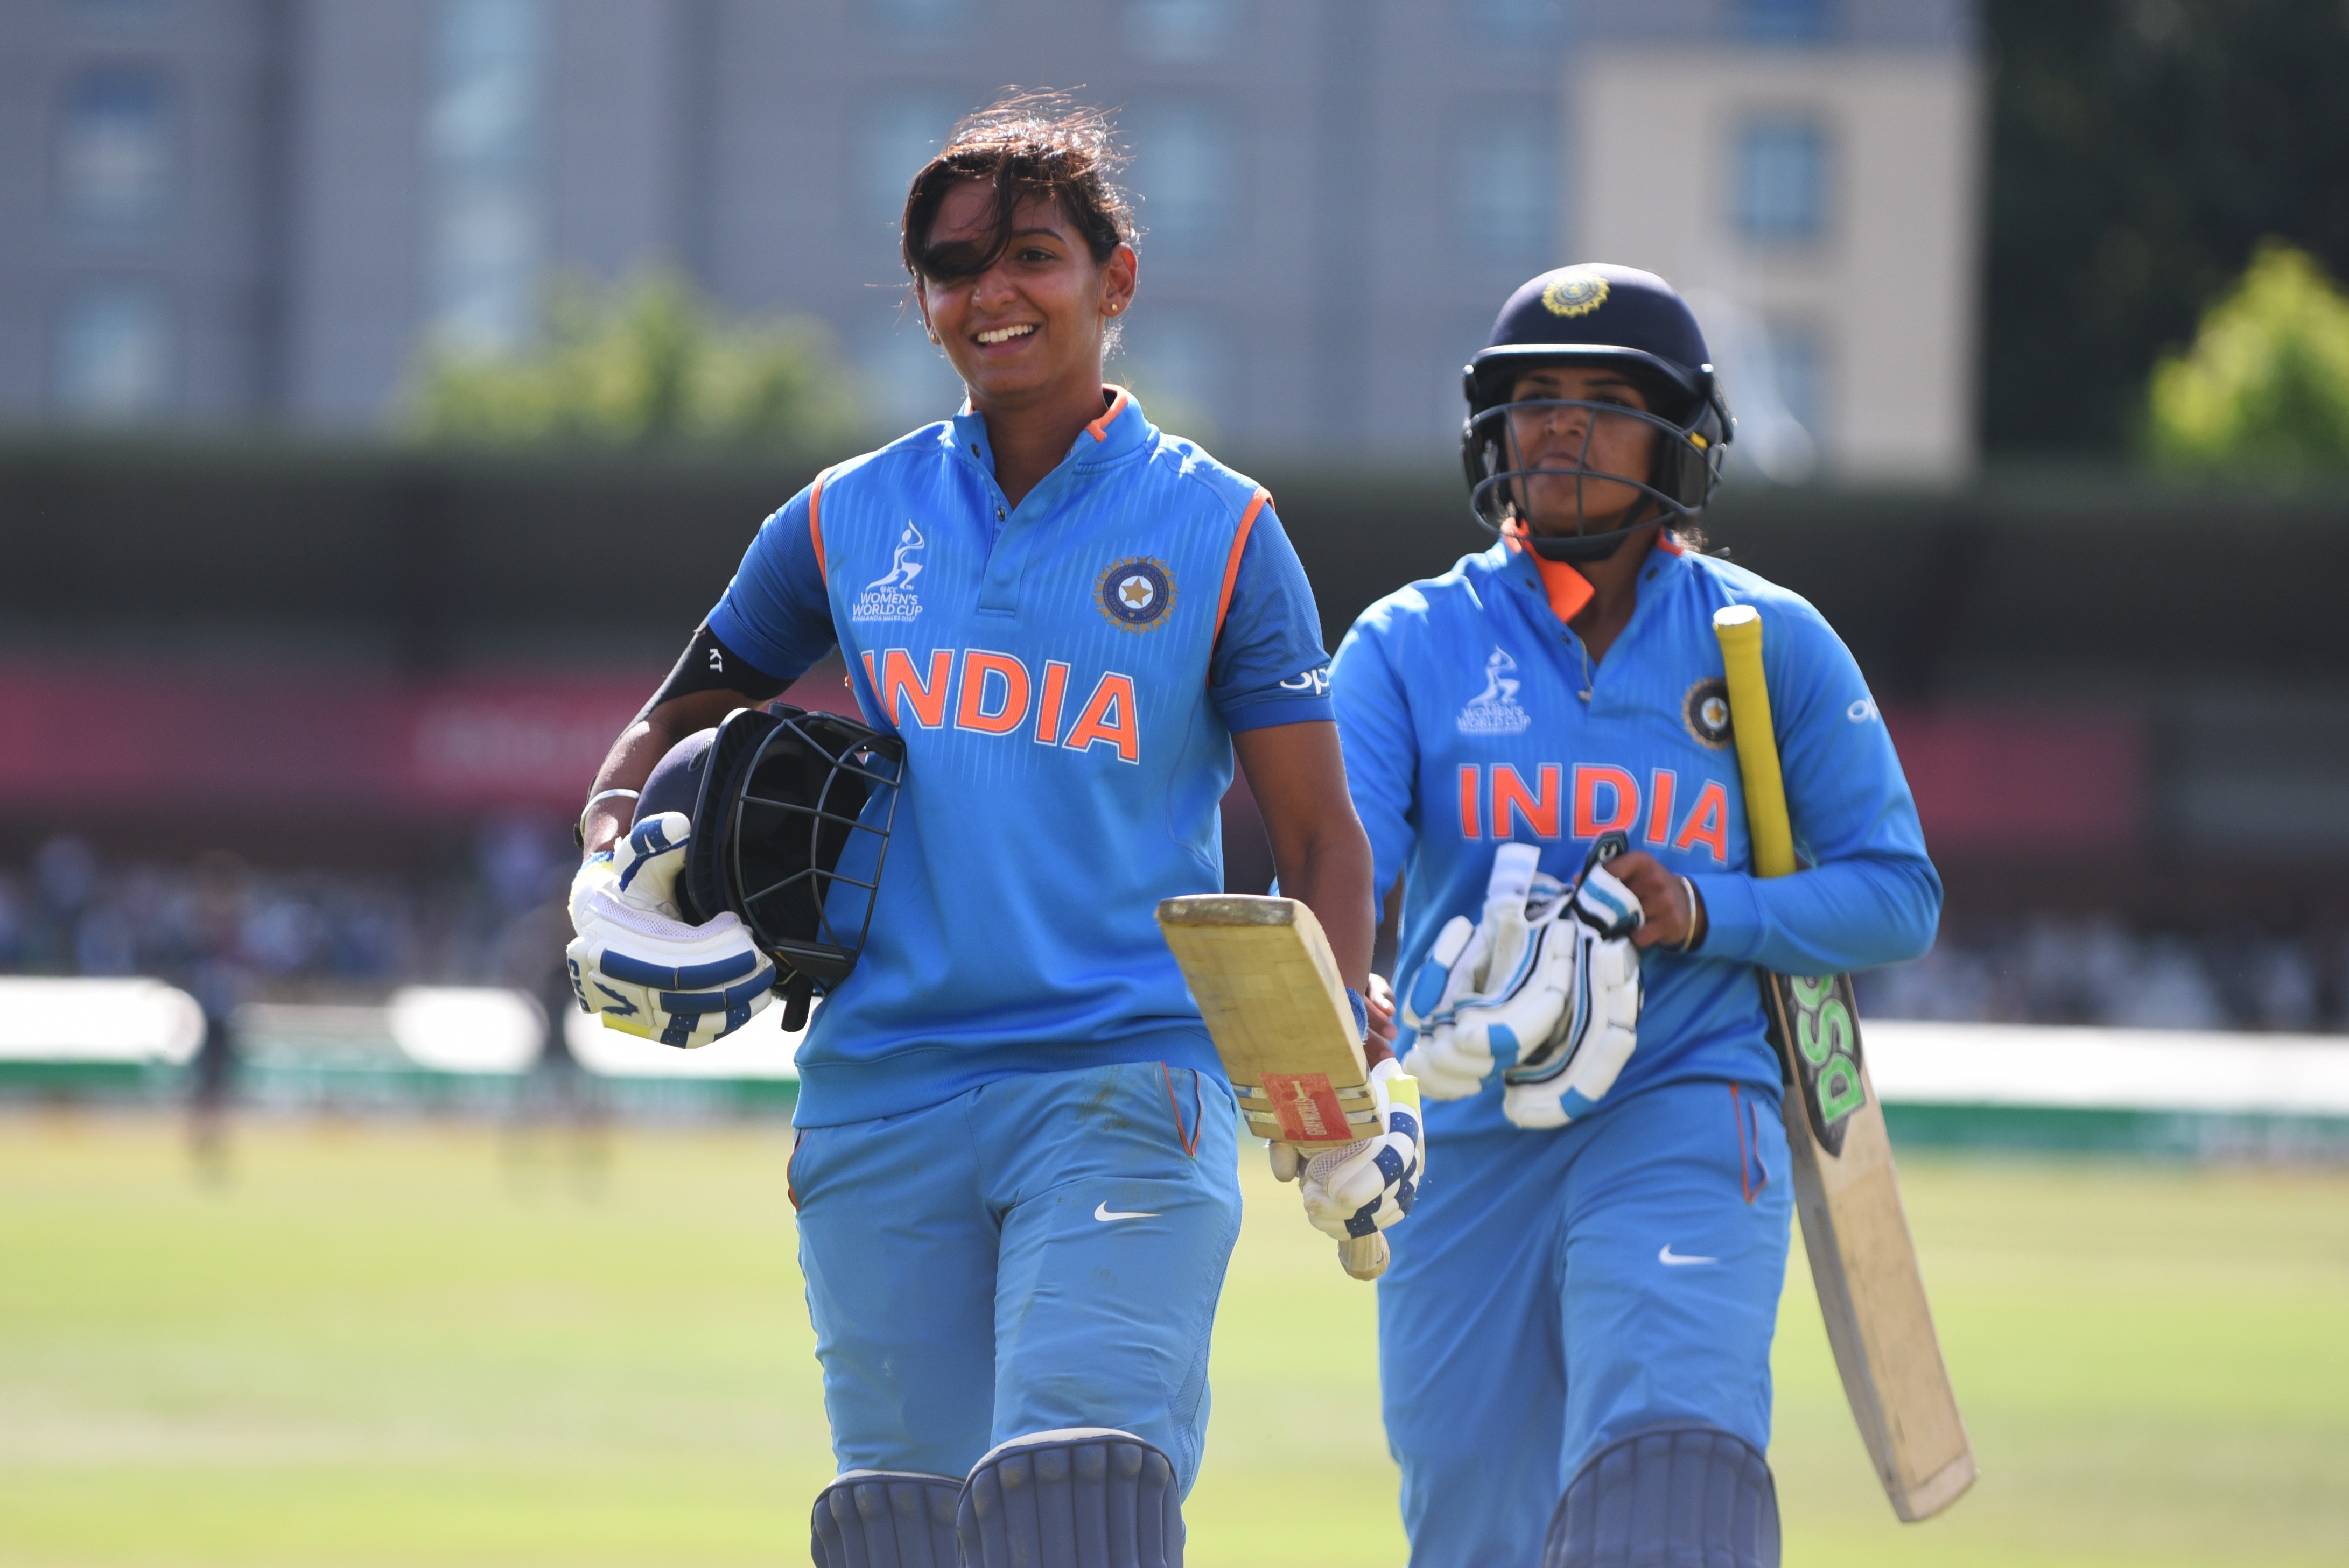 Women’s T20 Cricket added to 2022 Commonwealth Games